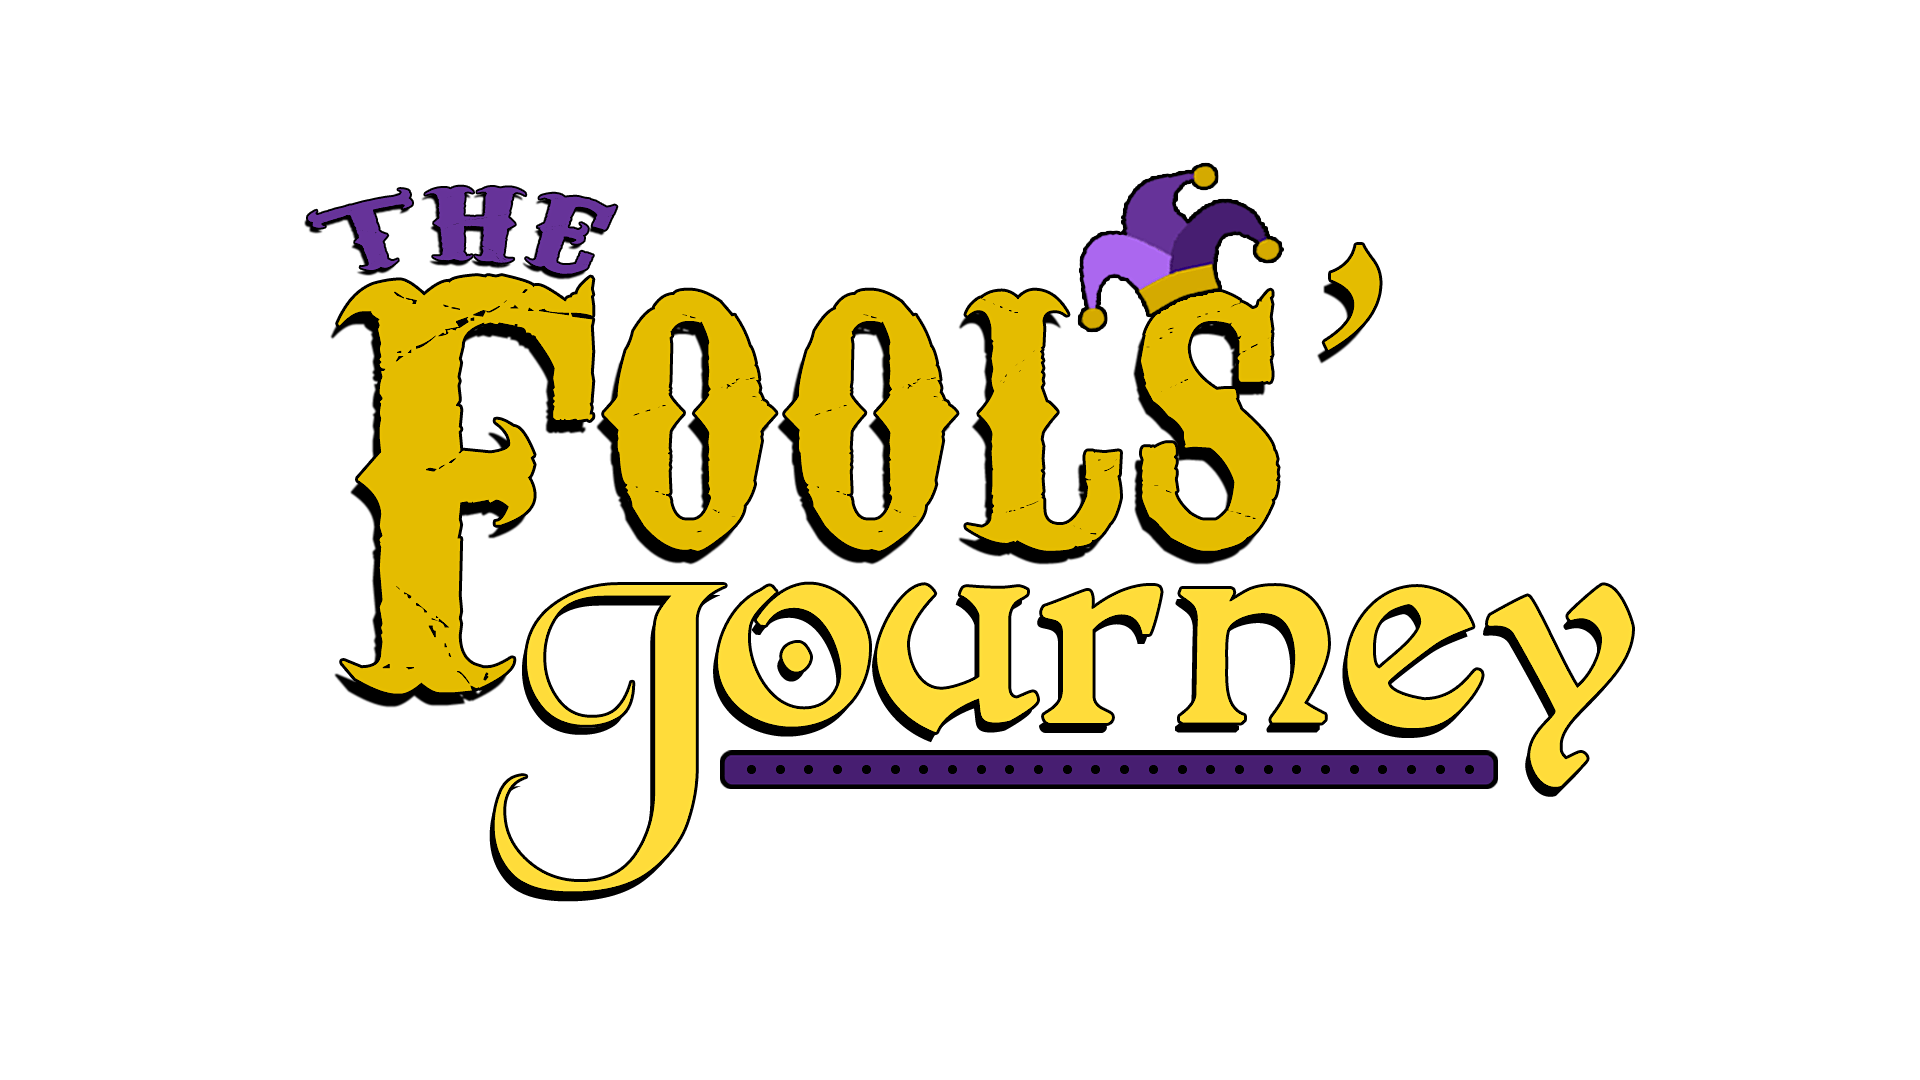 Explore the journey of a jester highlighted with playful text in stylish font. Against a soothing olive green backdrop, the artistic design features a charming jester hat. Fascinating for all, but with no corporate buzzwords involved!